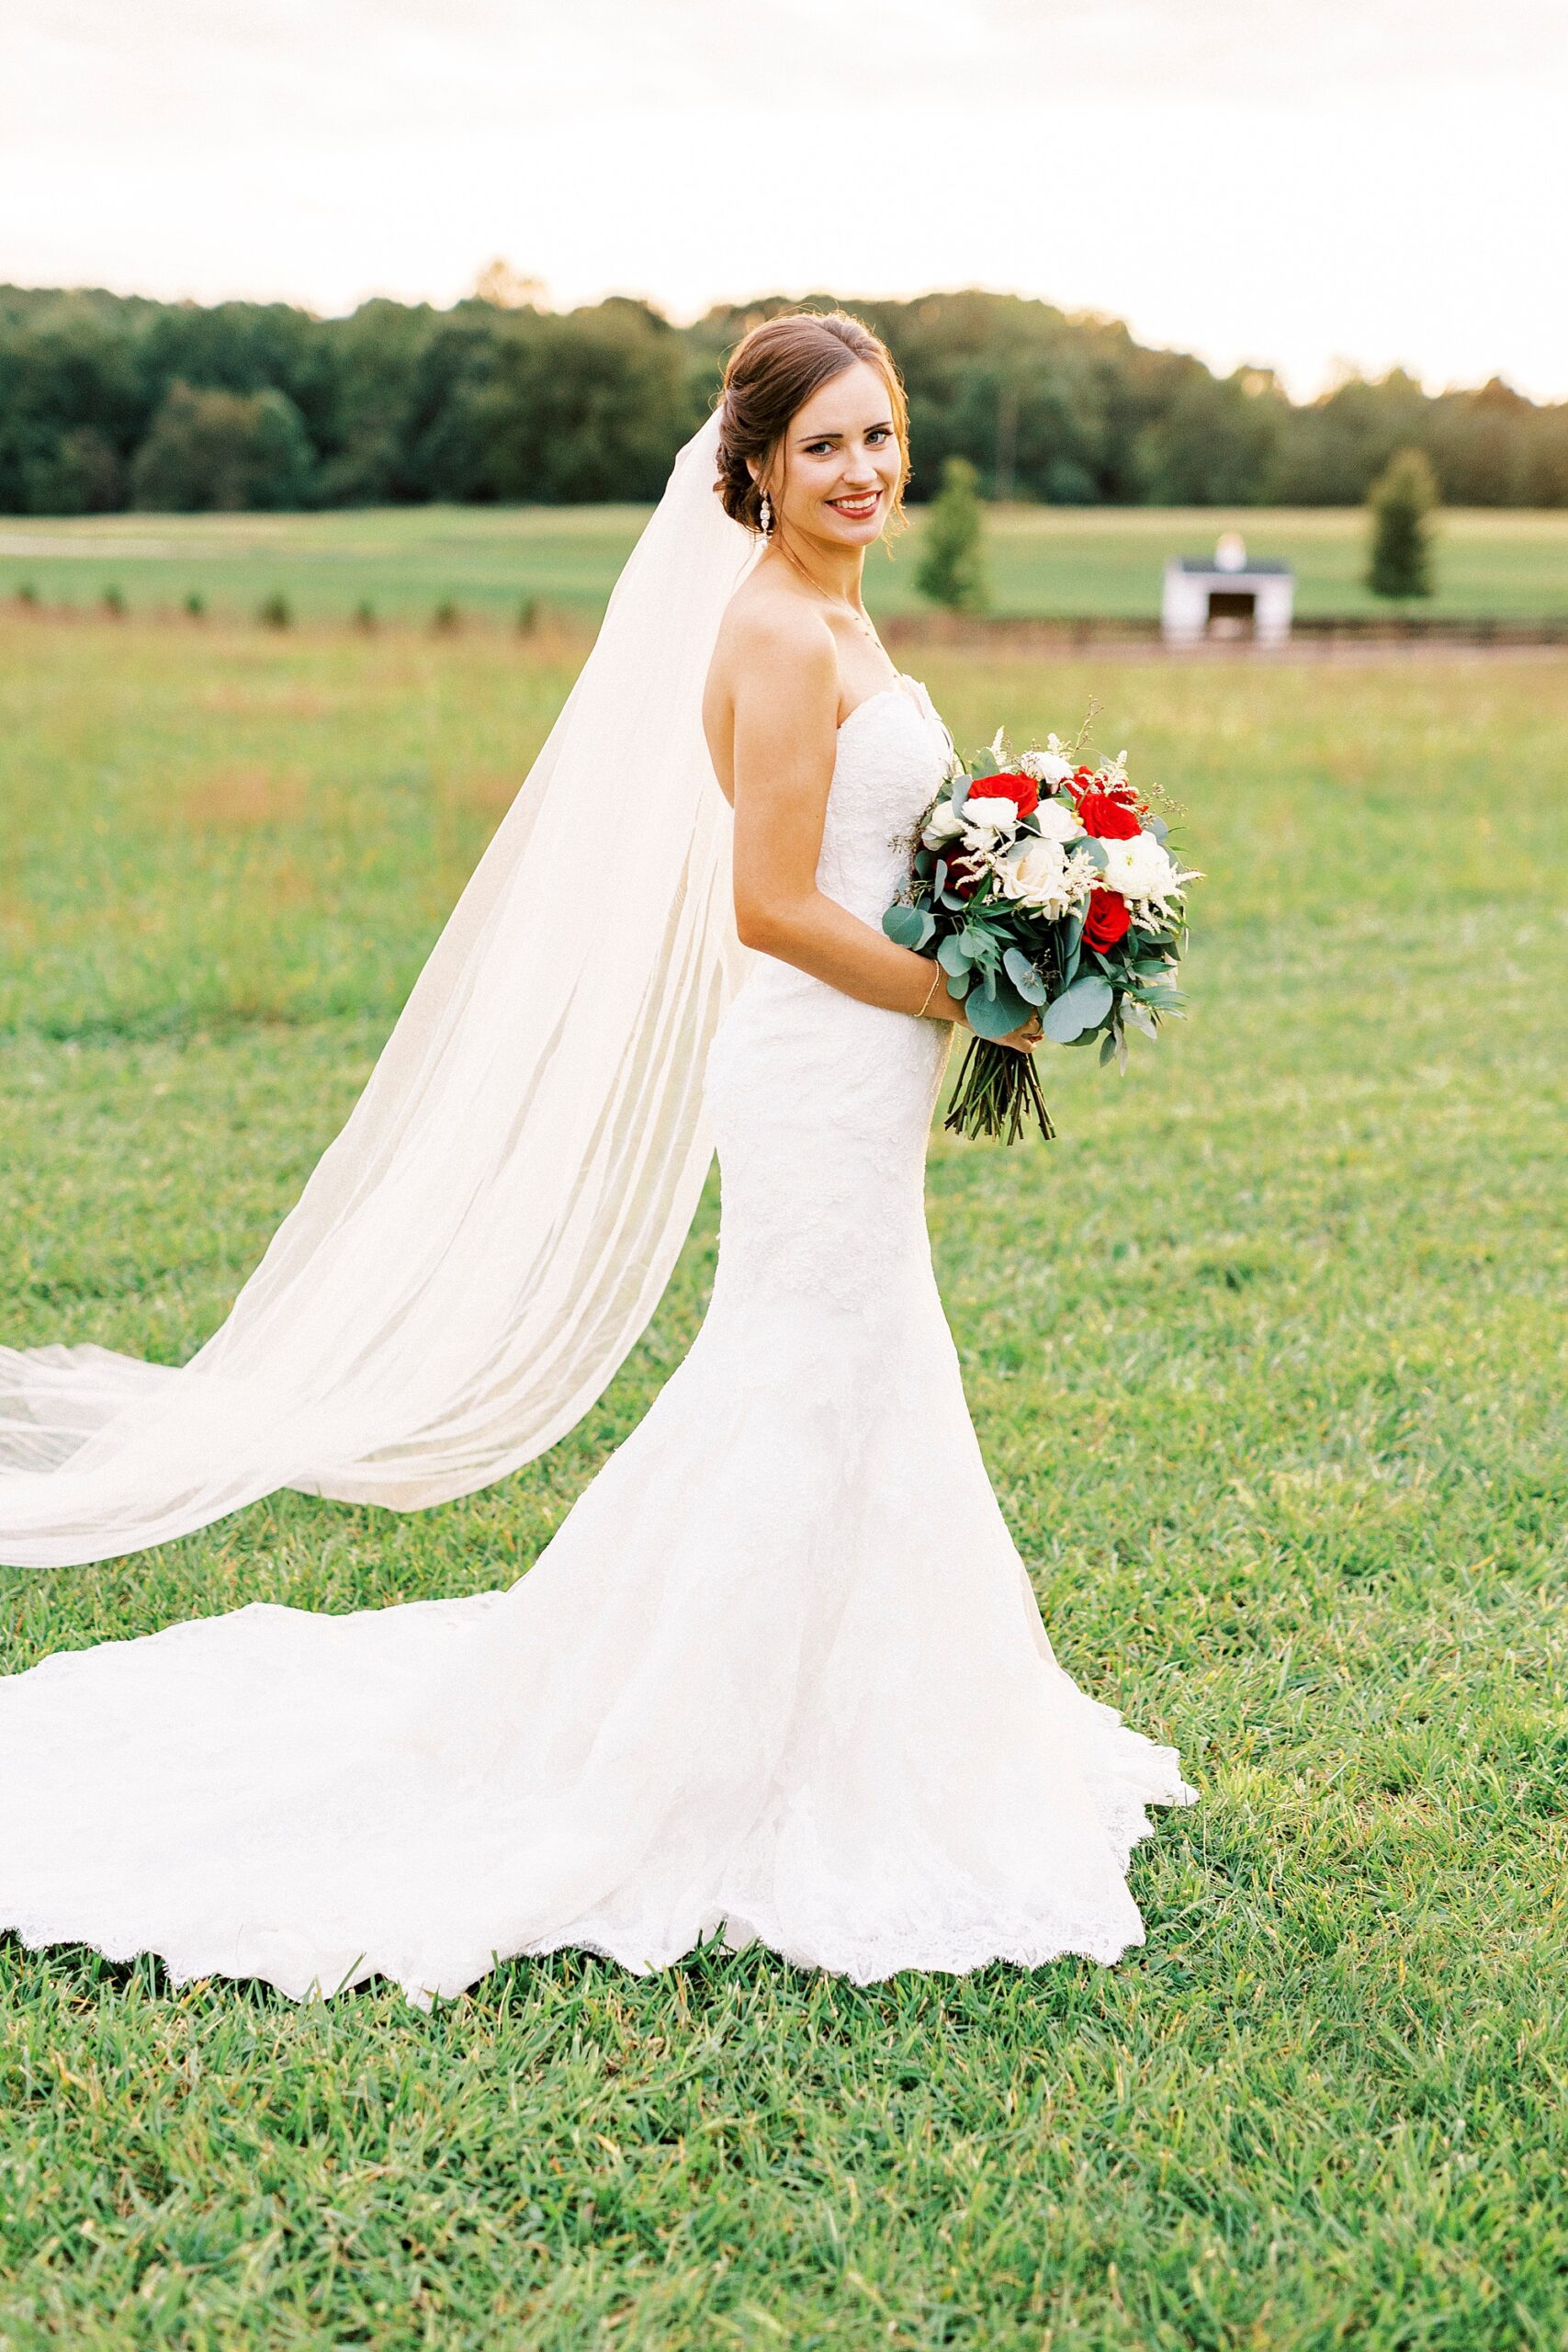 bride walks across lawn in wedding gown with red and white flowers